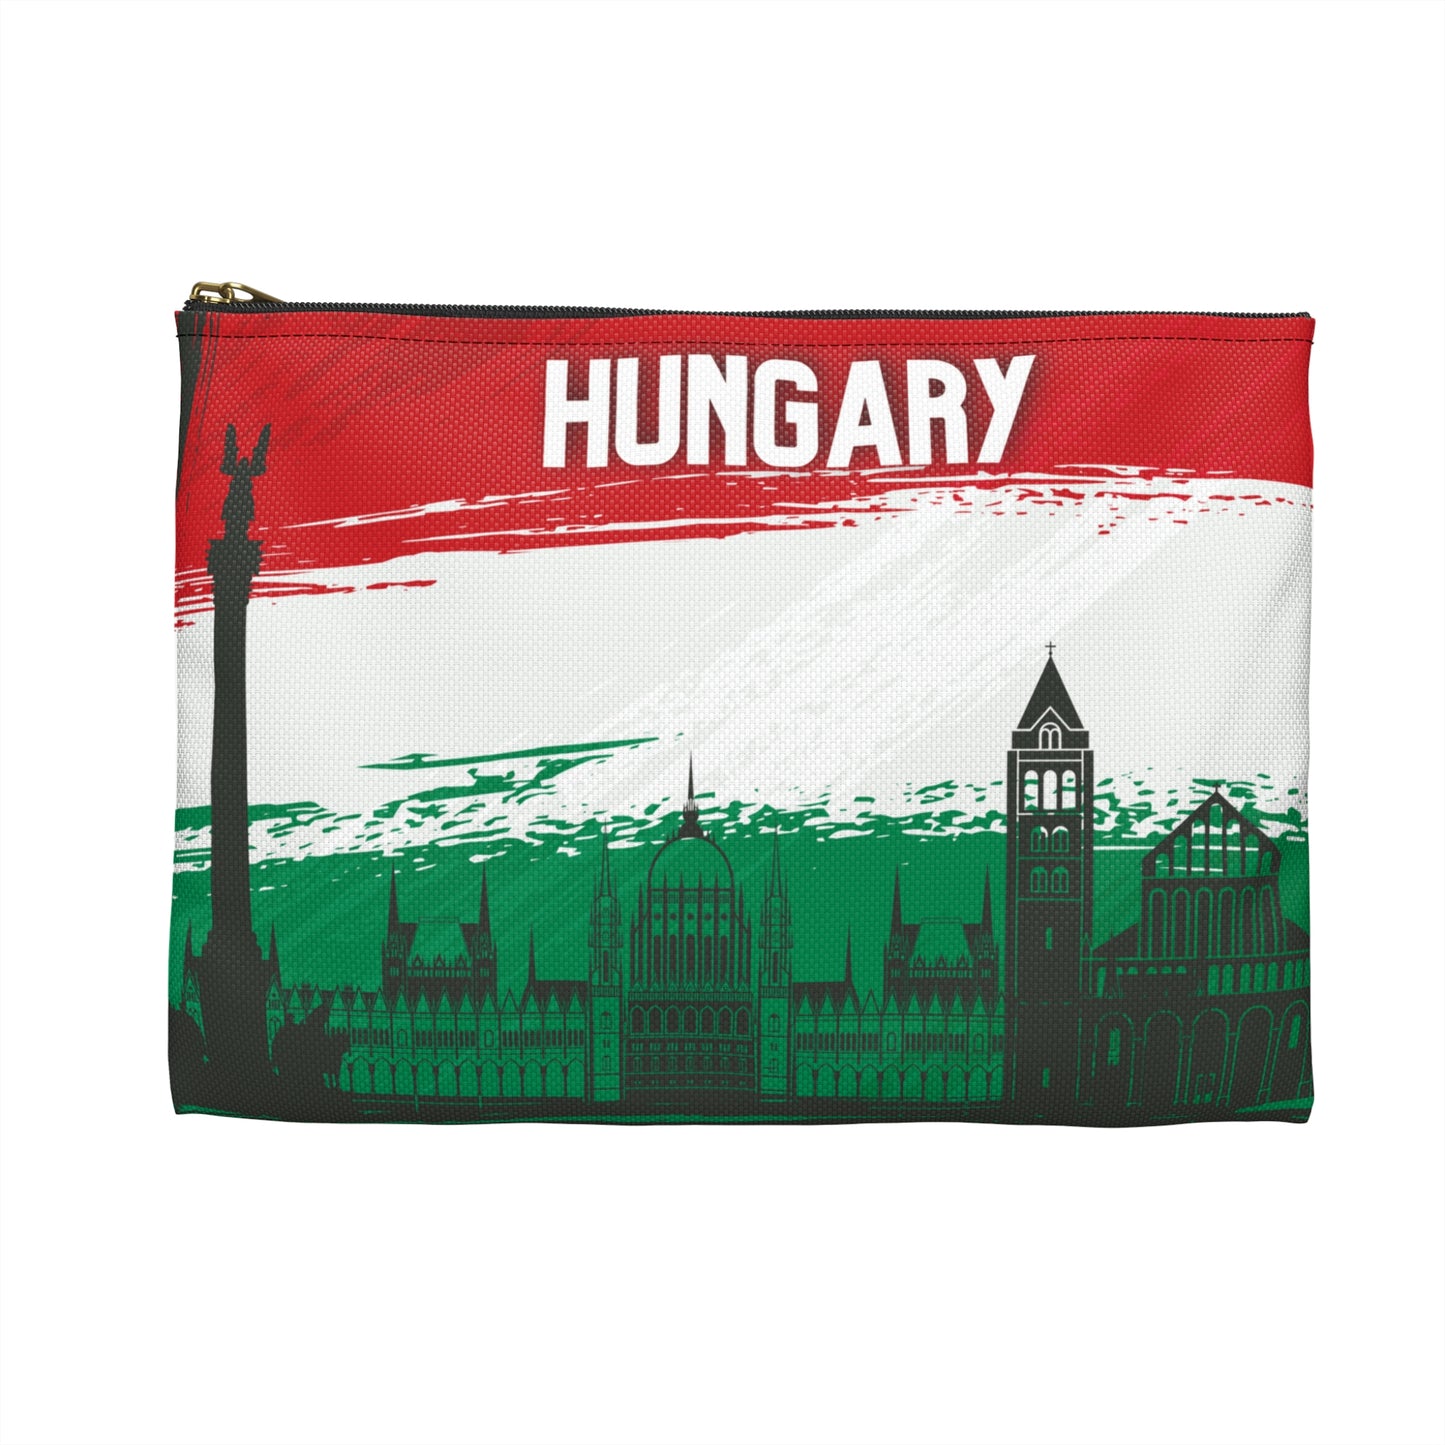 Hungary Accessory Pouch